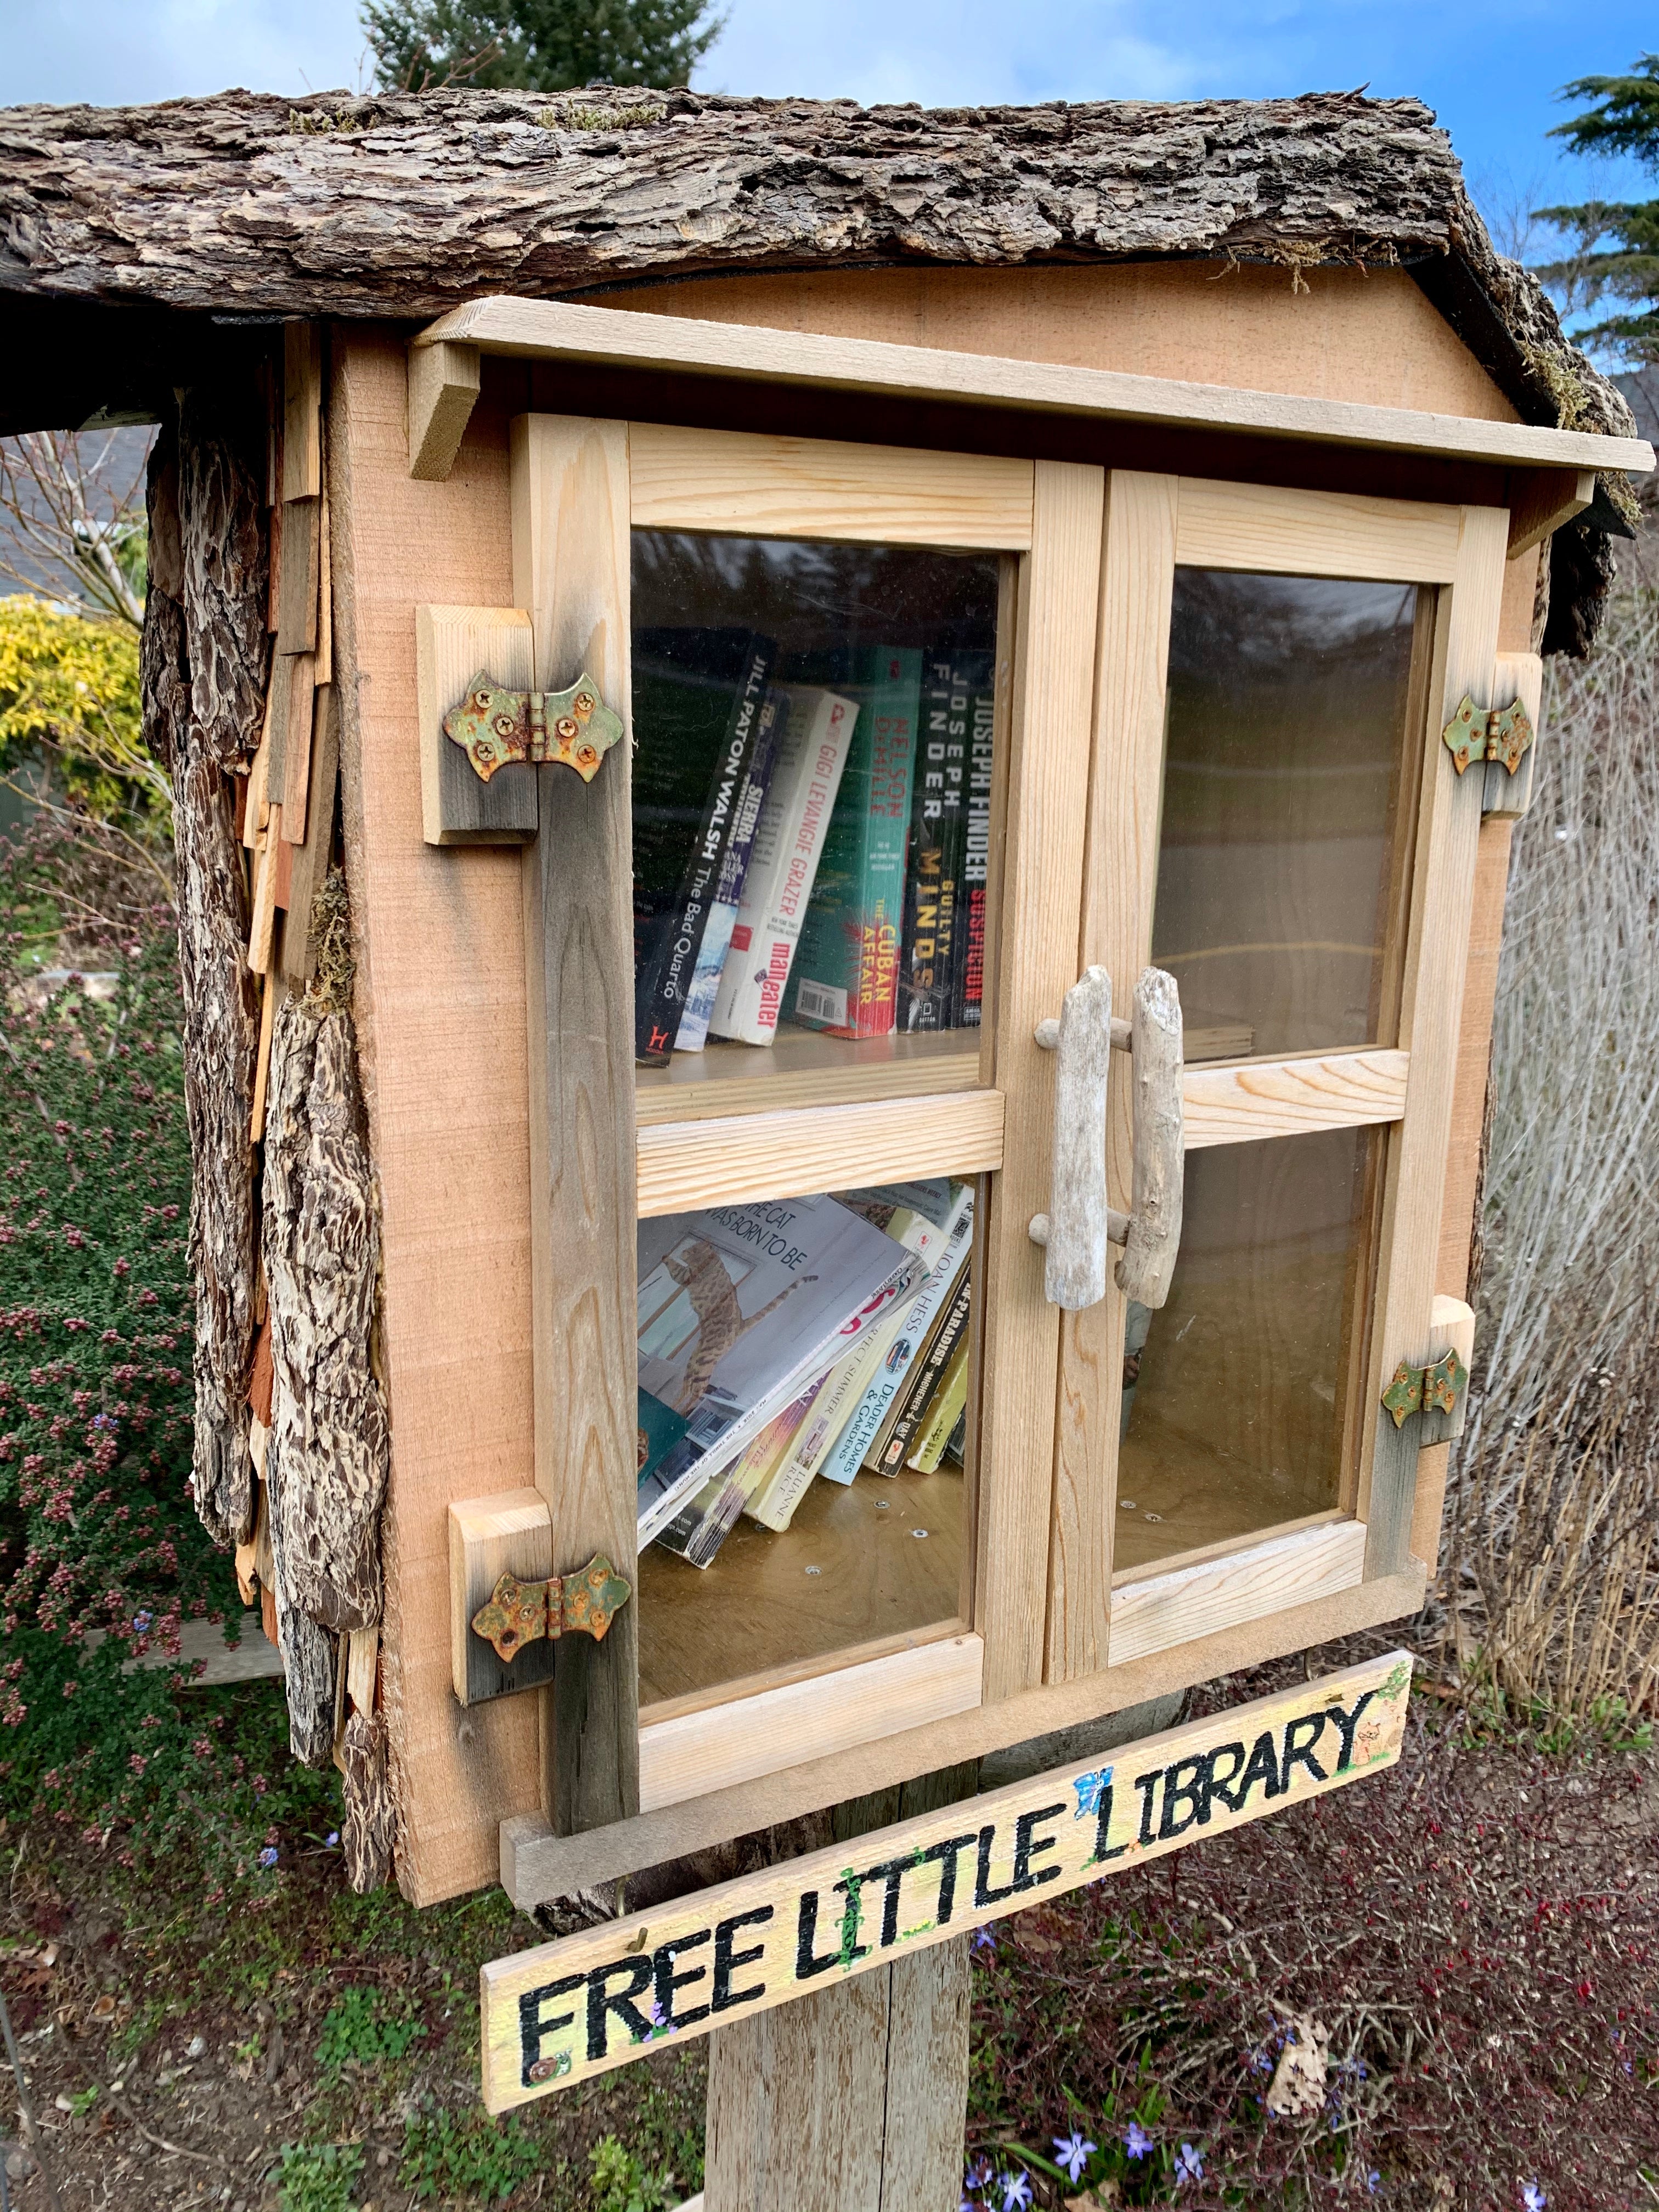 Trading books at little free library